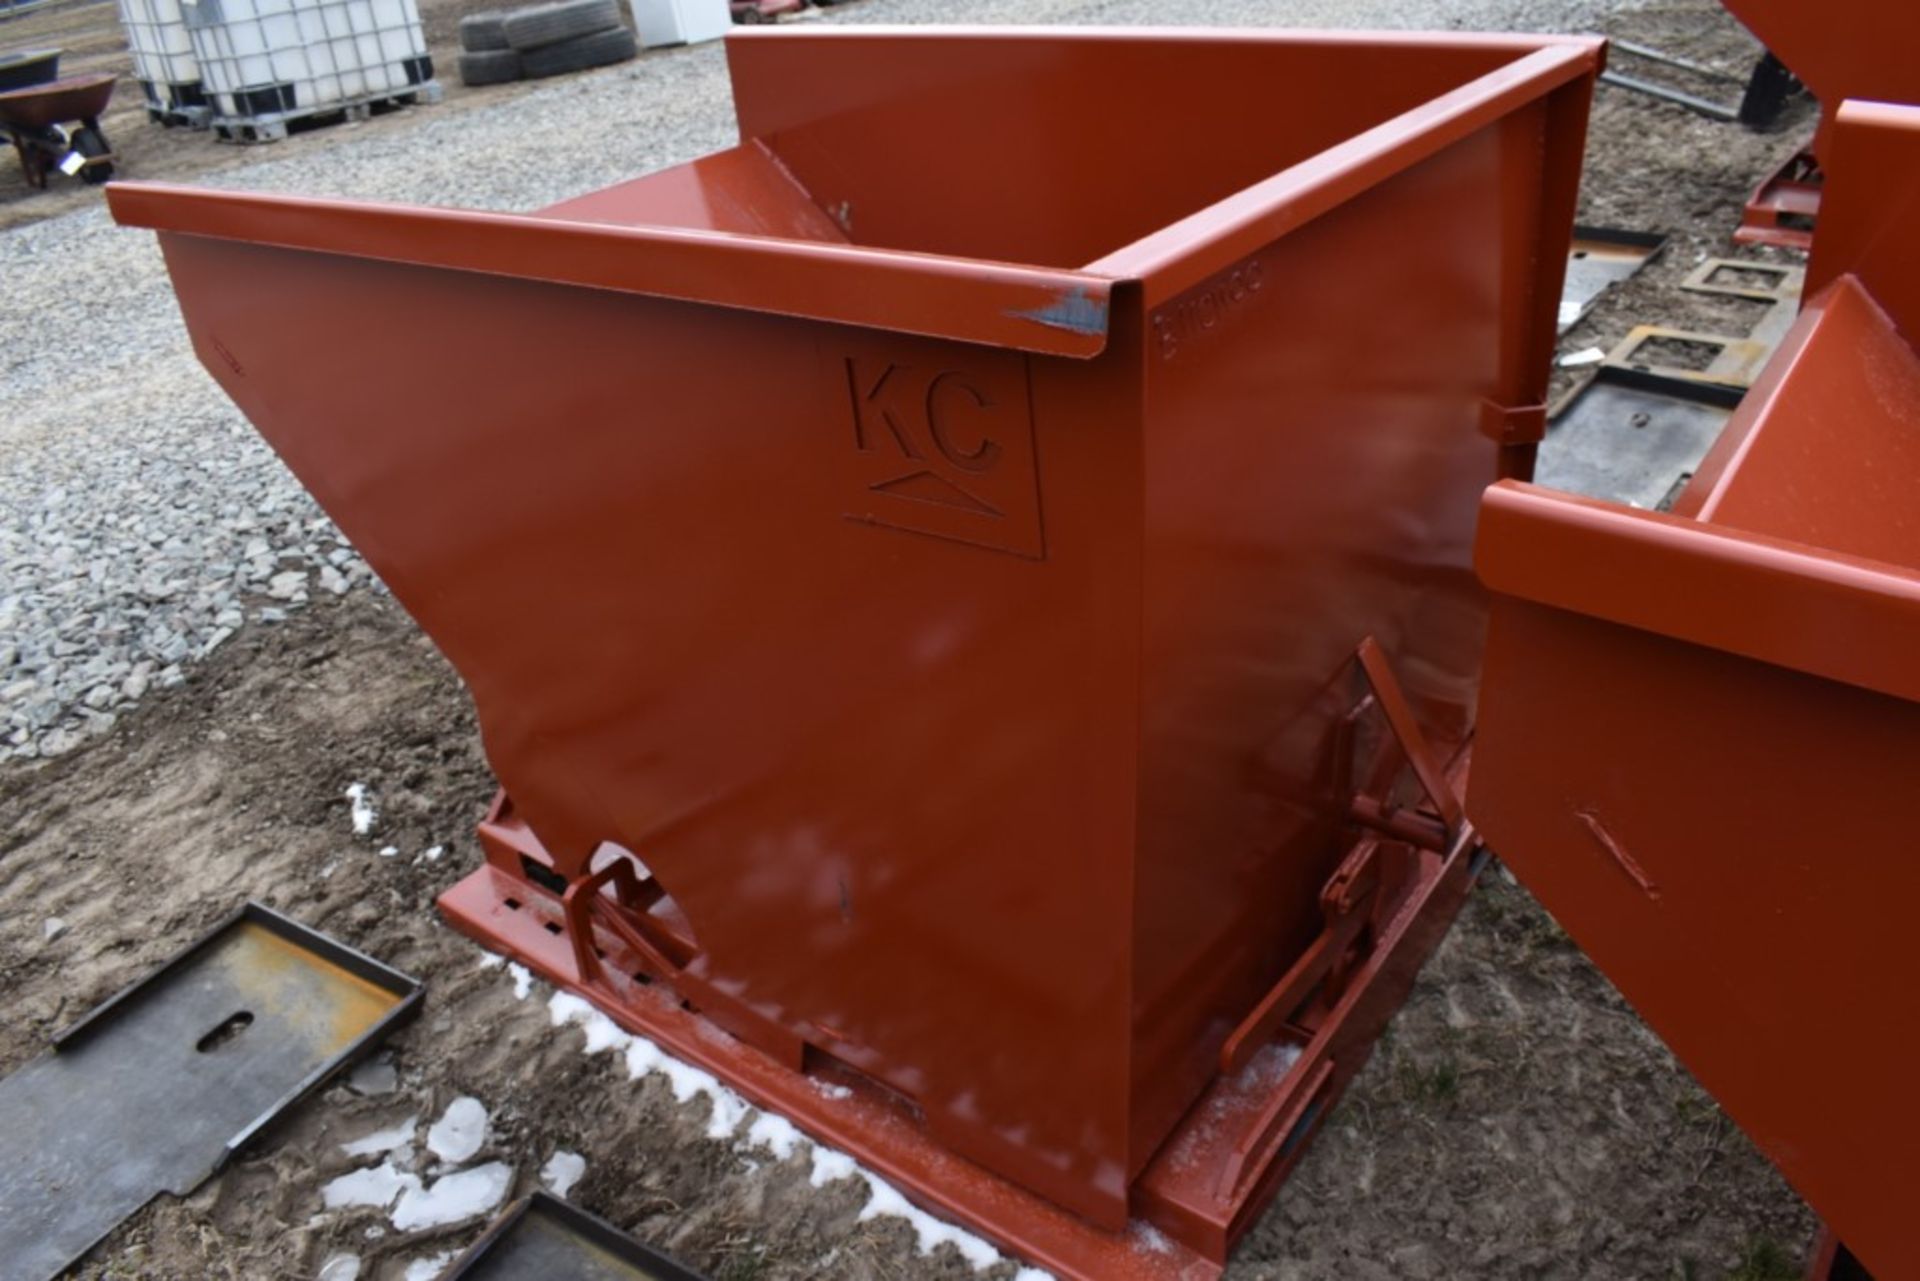 New KC Fork Mounted Self Tipping Dumpster - Image 5 of 8